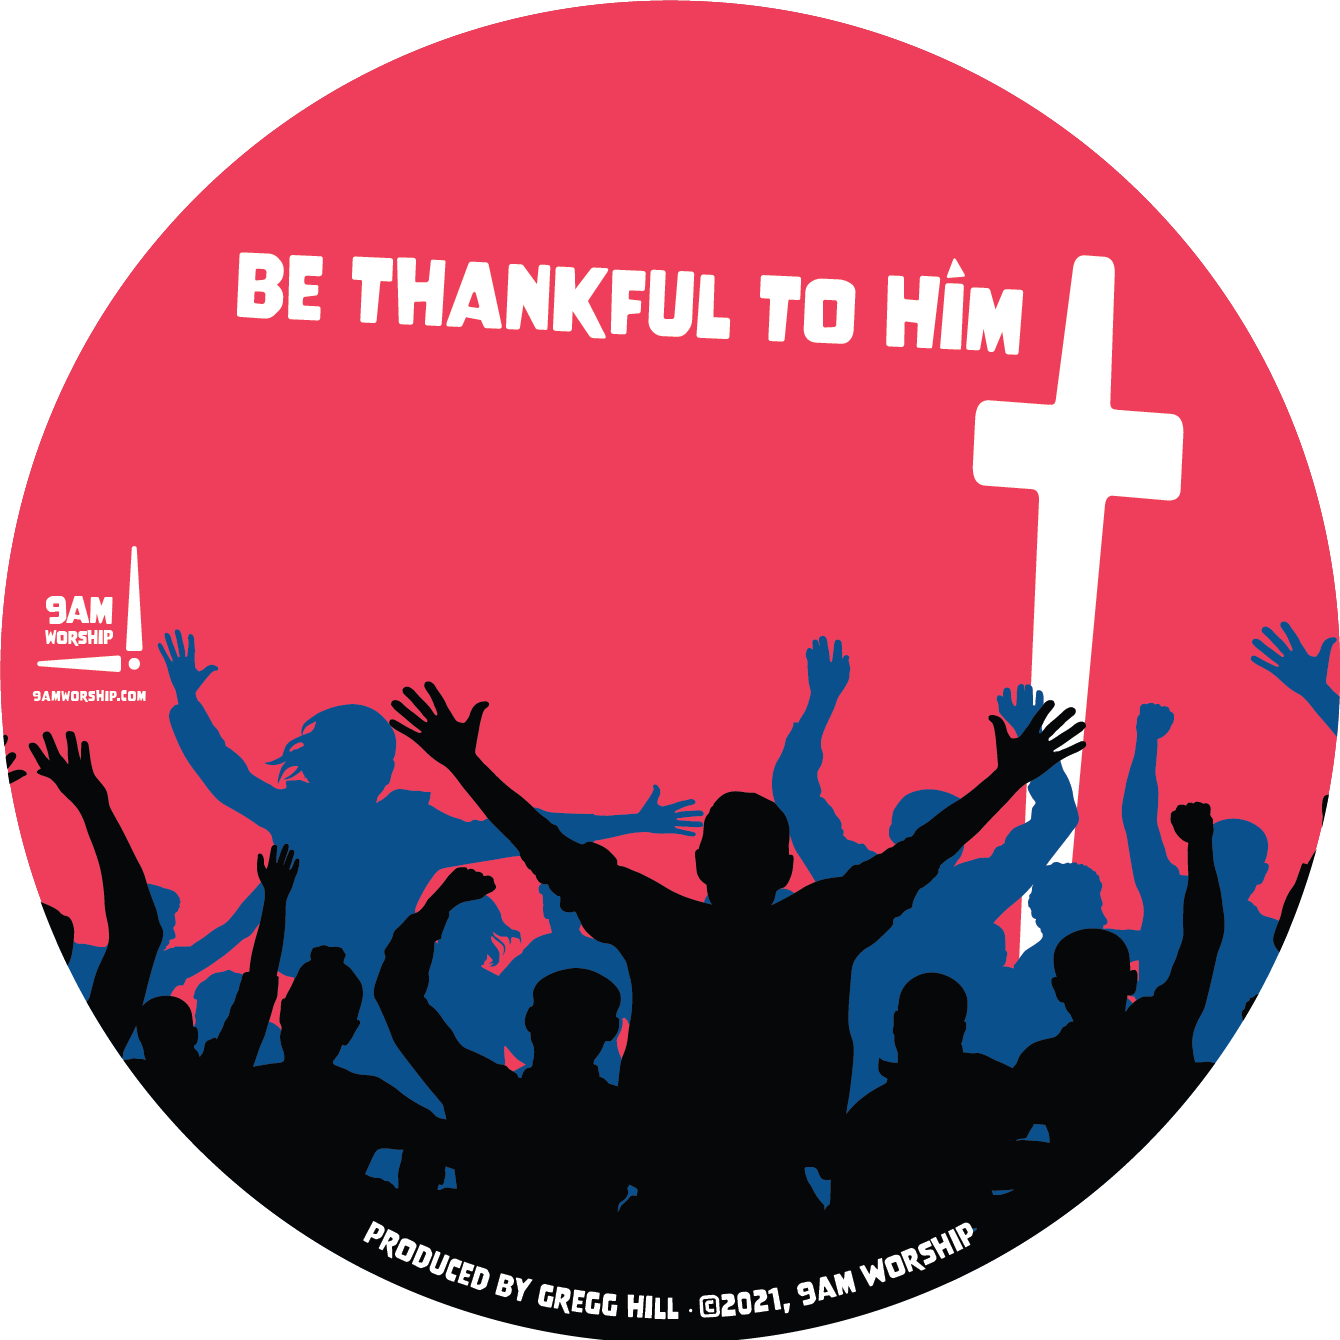 Album disc image for "be thankful to Him" by 9am worship